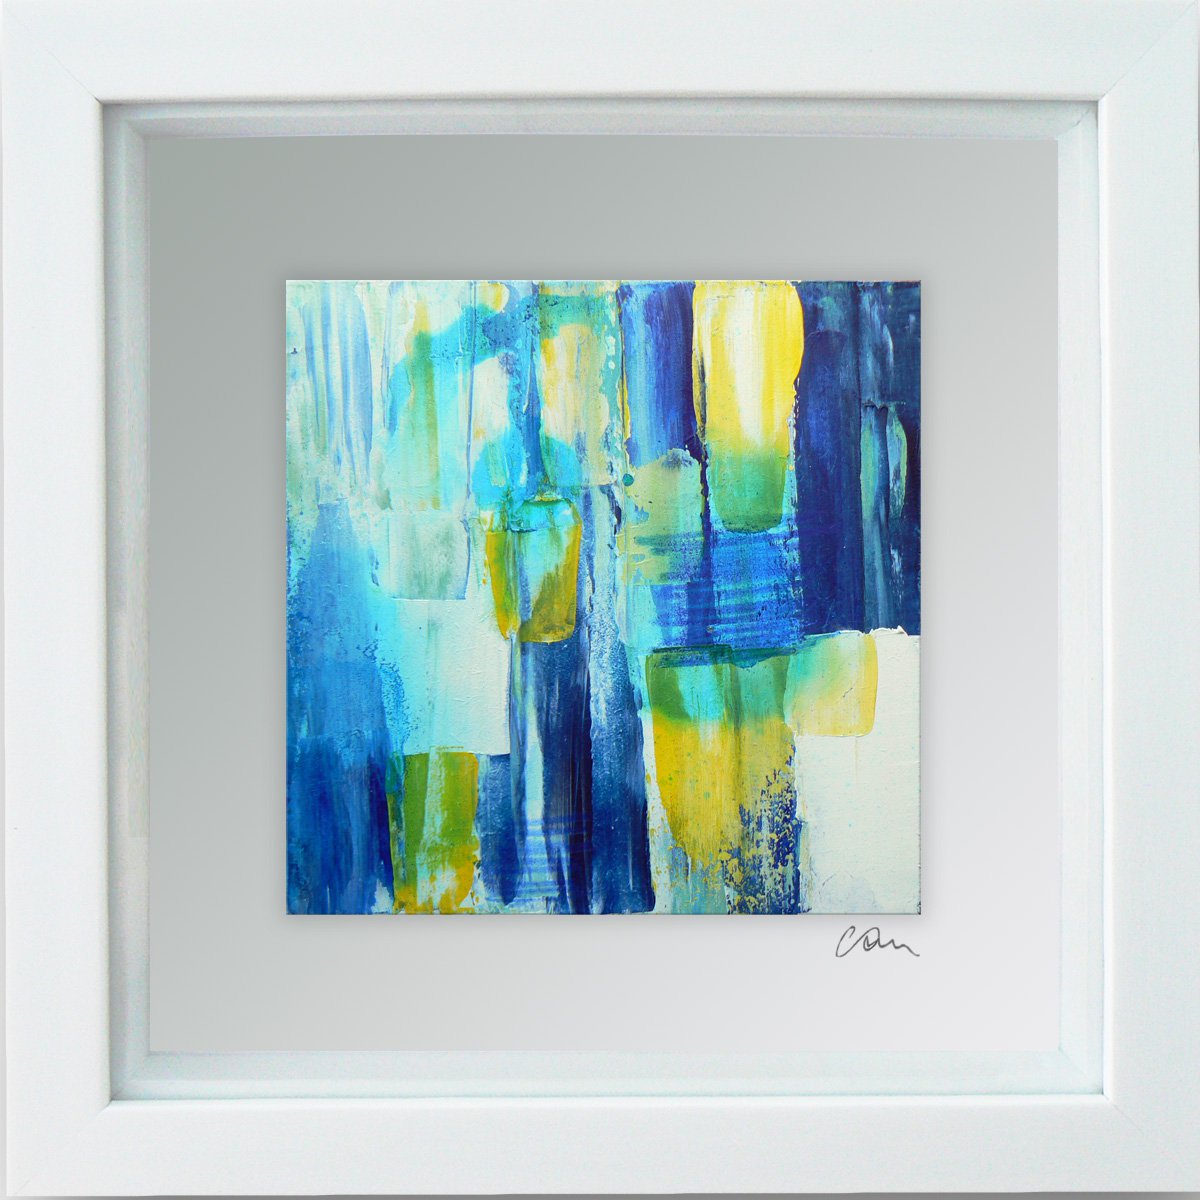 Framed ready to hang original abstract - Deep water #15 by Carolynne Coulson